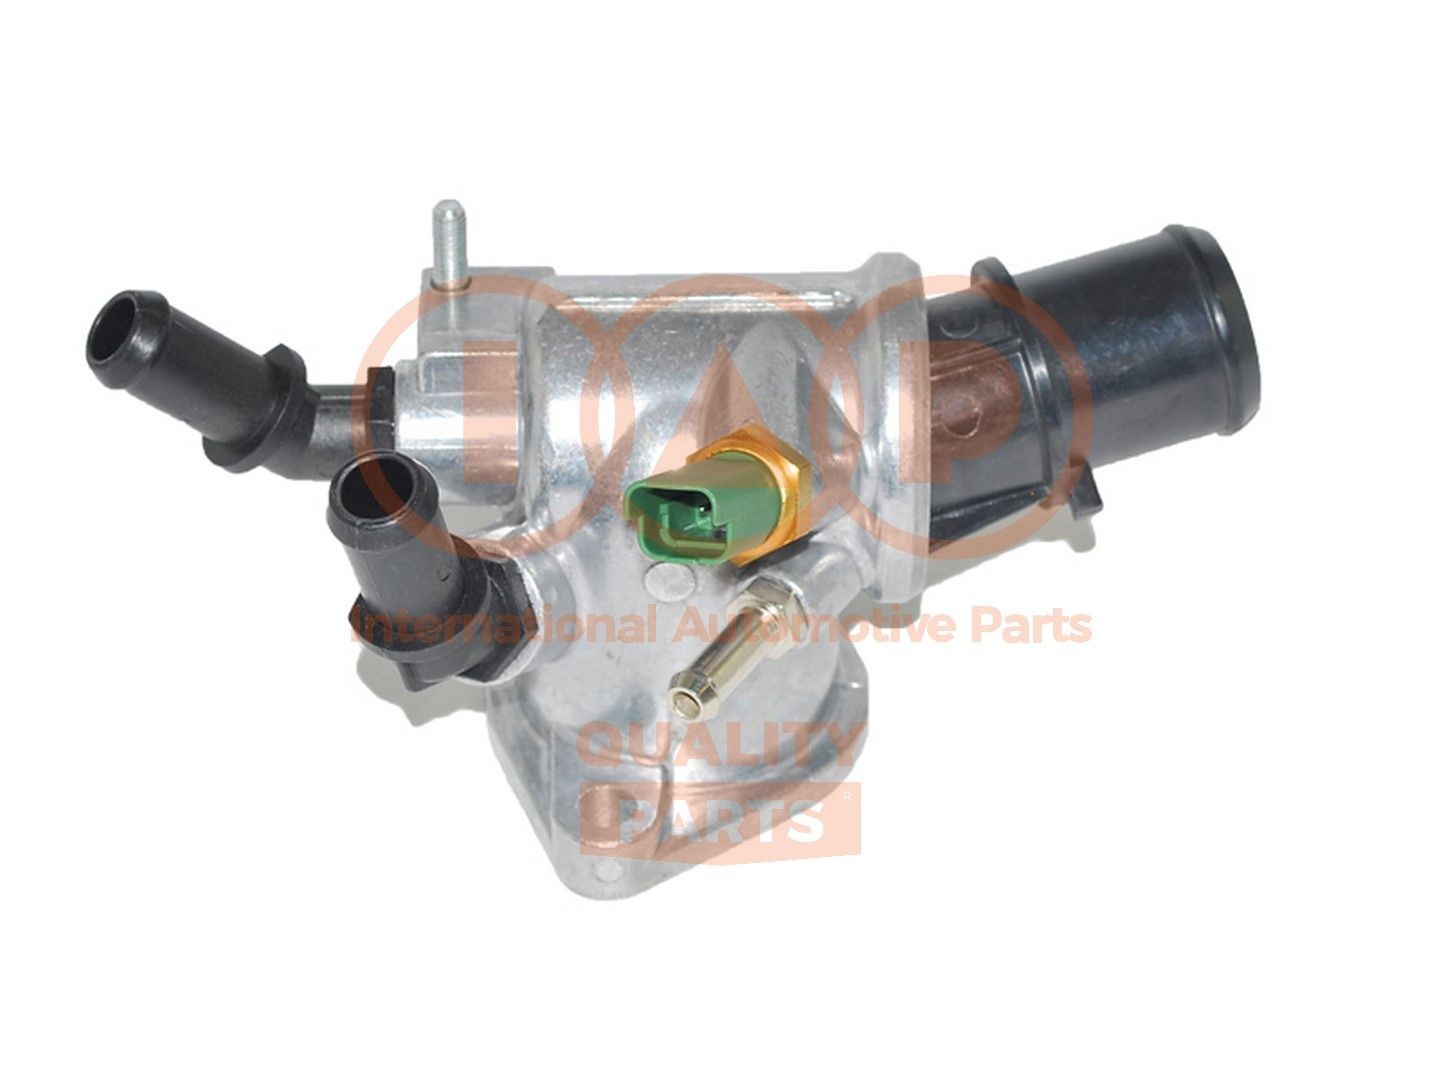 IAP QUALITY PARTS 155-16101 Engine thermostat 95 517 661